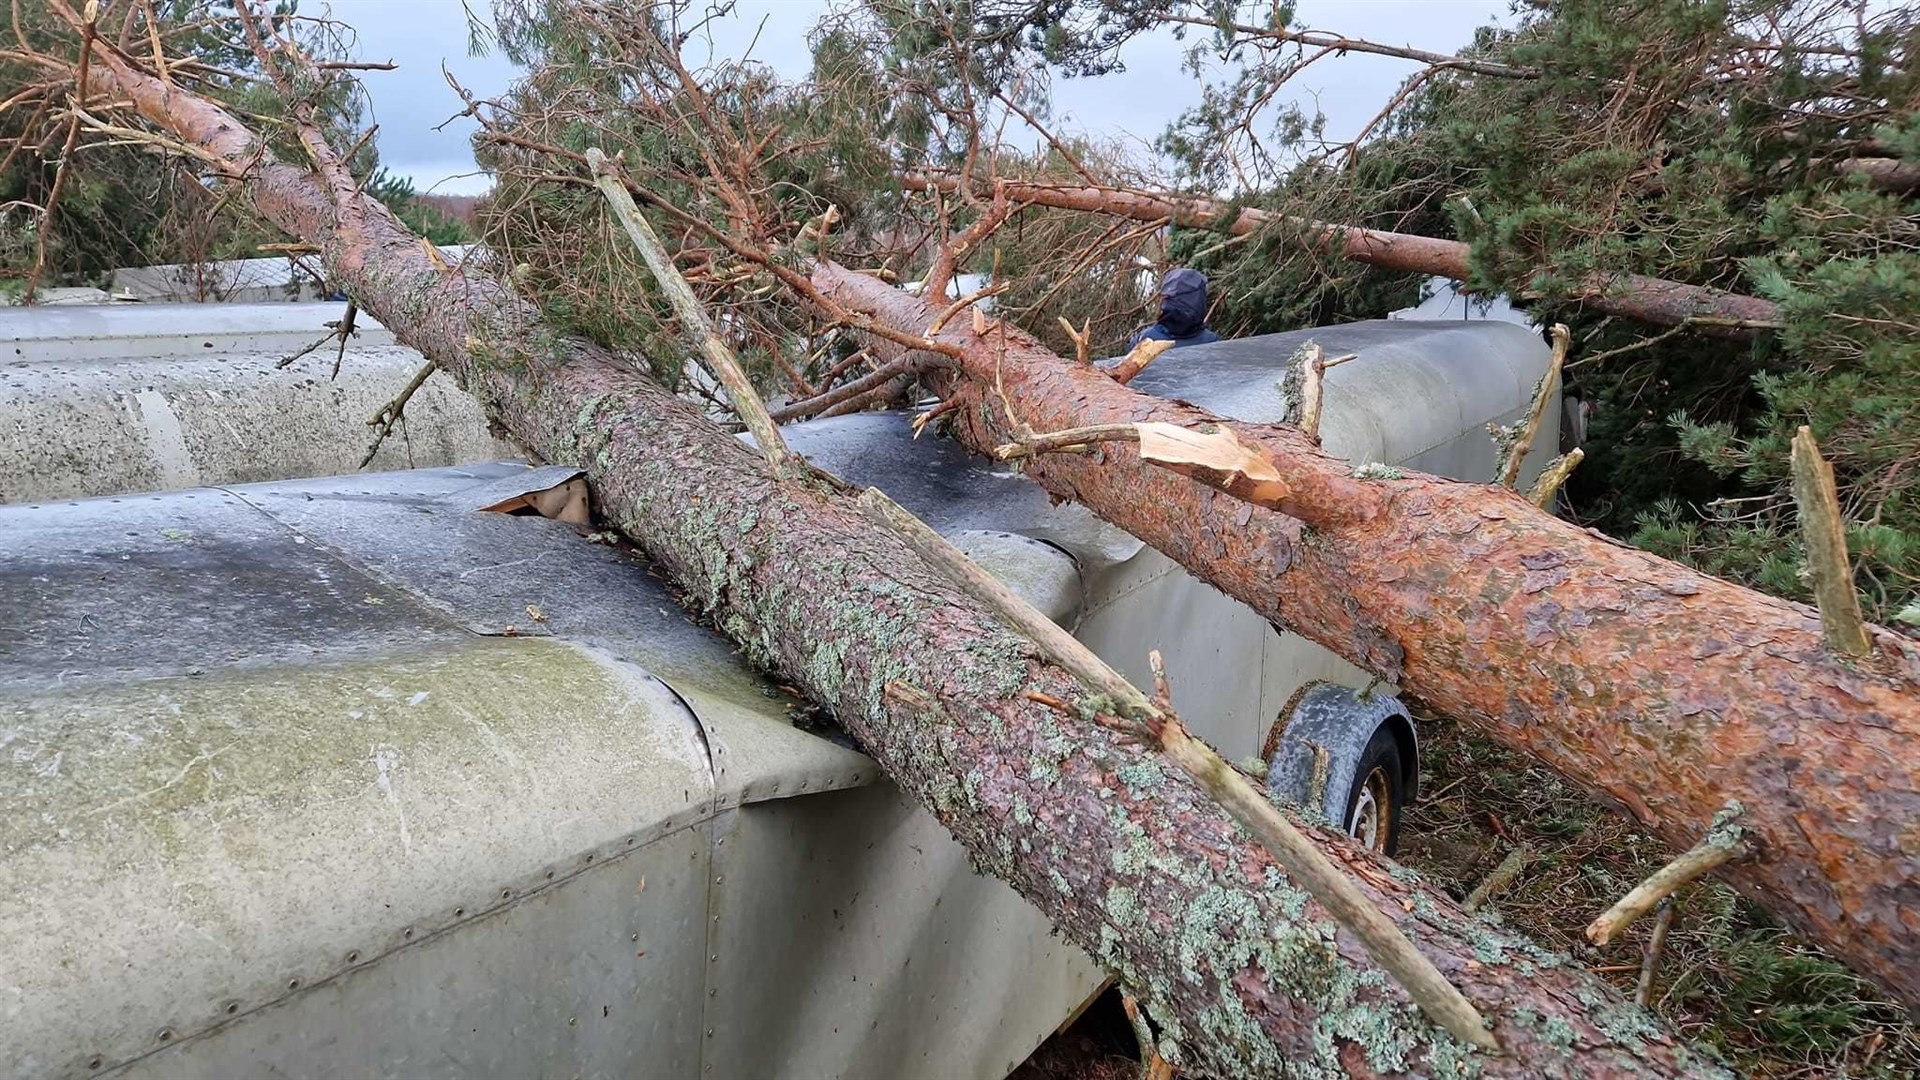 Crash landing: trees brought down on empty trailers